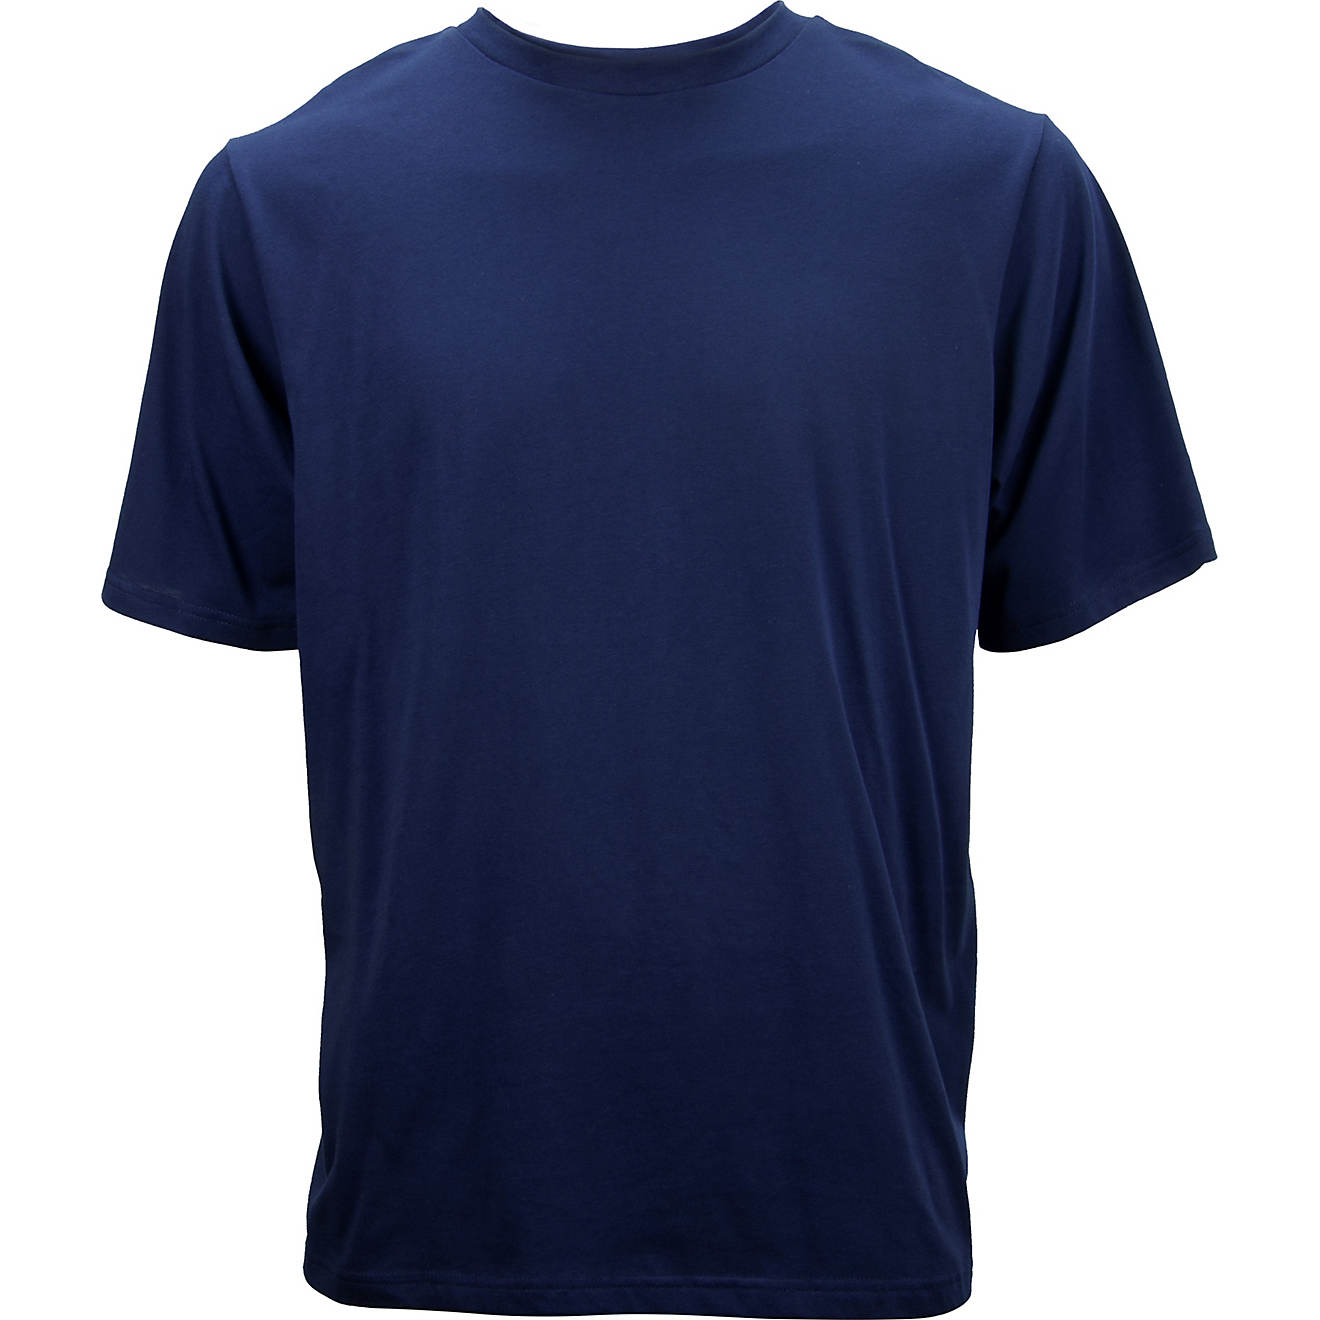 Marucci Men's Soft Touch T-shirt | Free Shipping at Academy